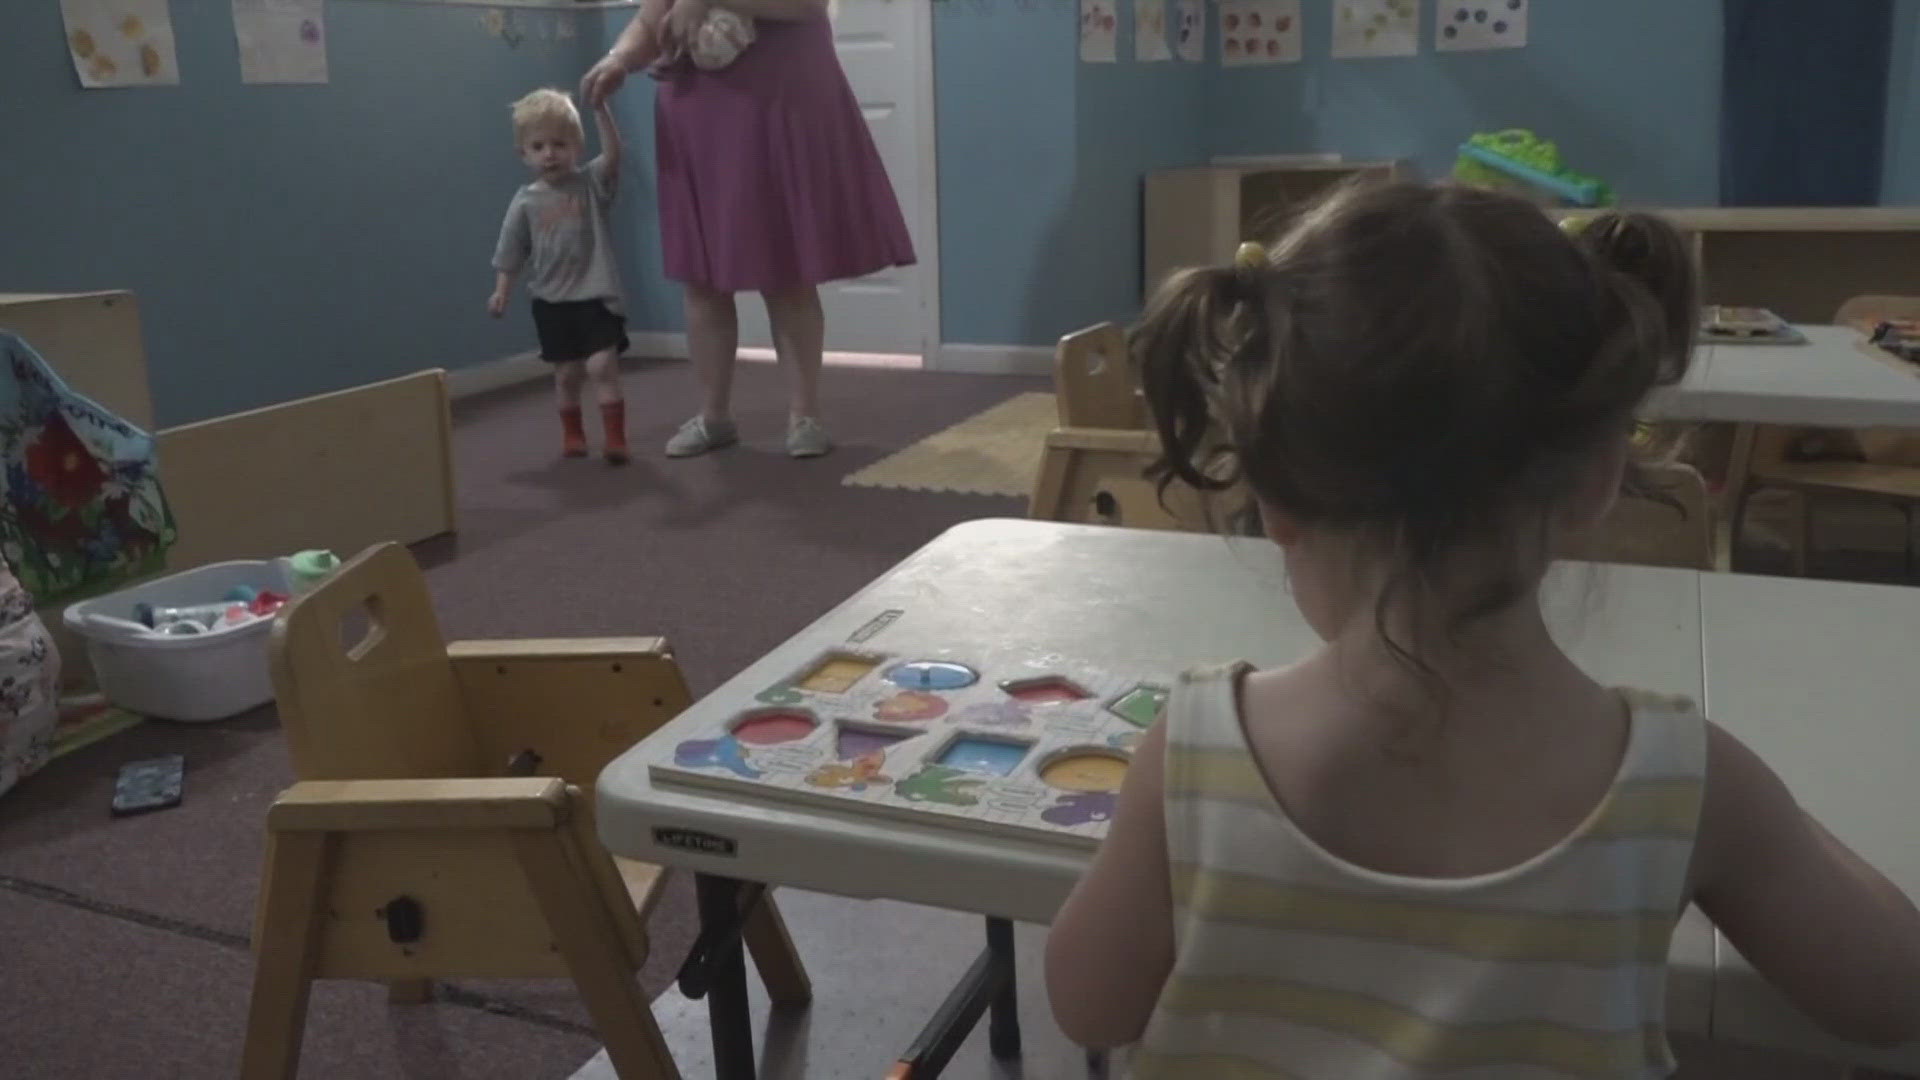 Many Mainers struggle with finding child care, but Penquis in Bangor is trying to address this problem.